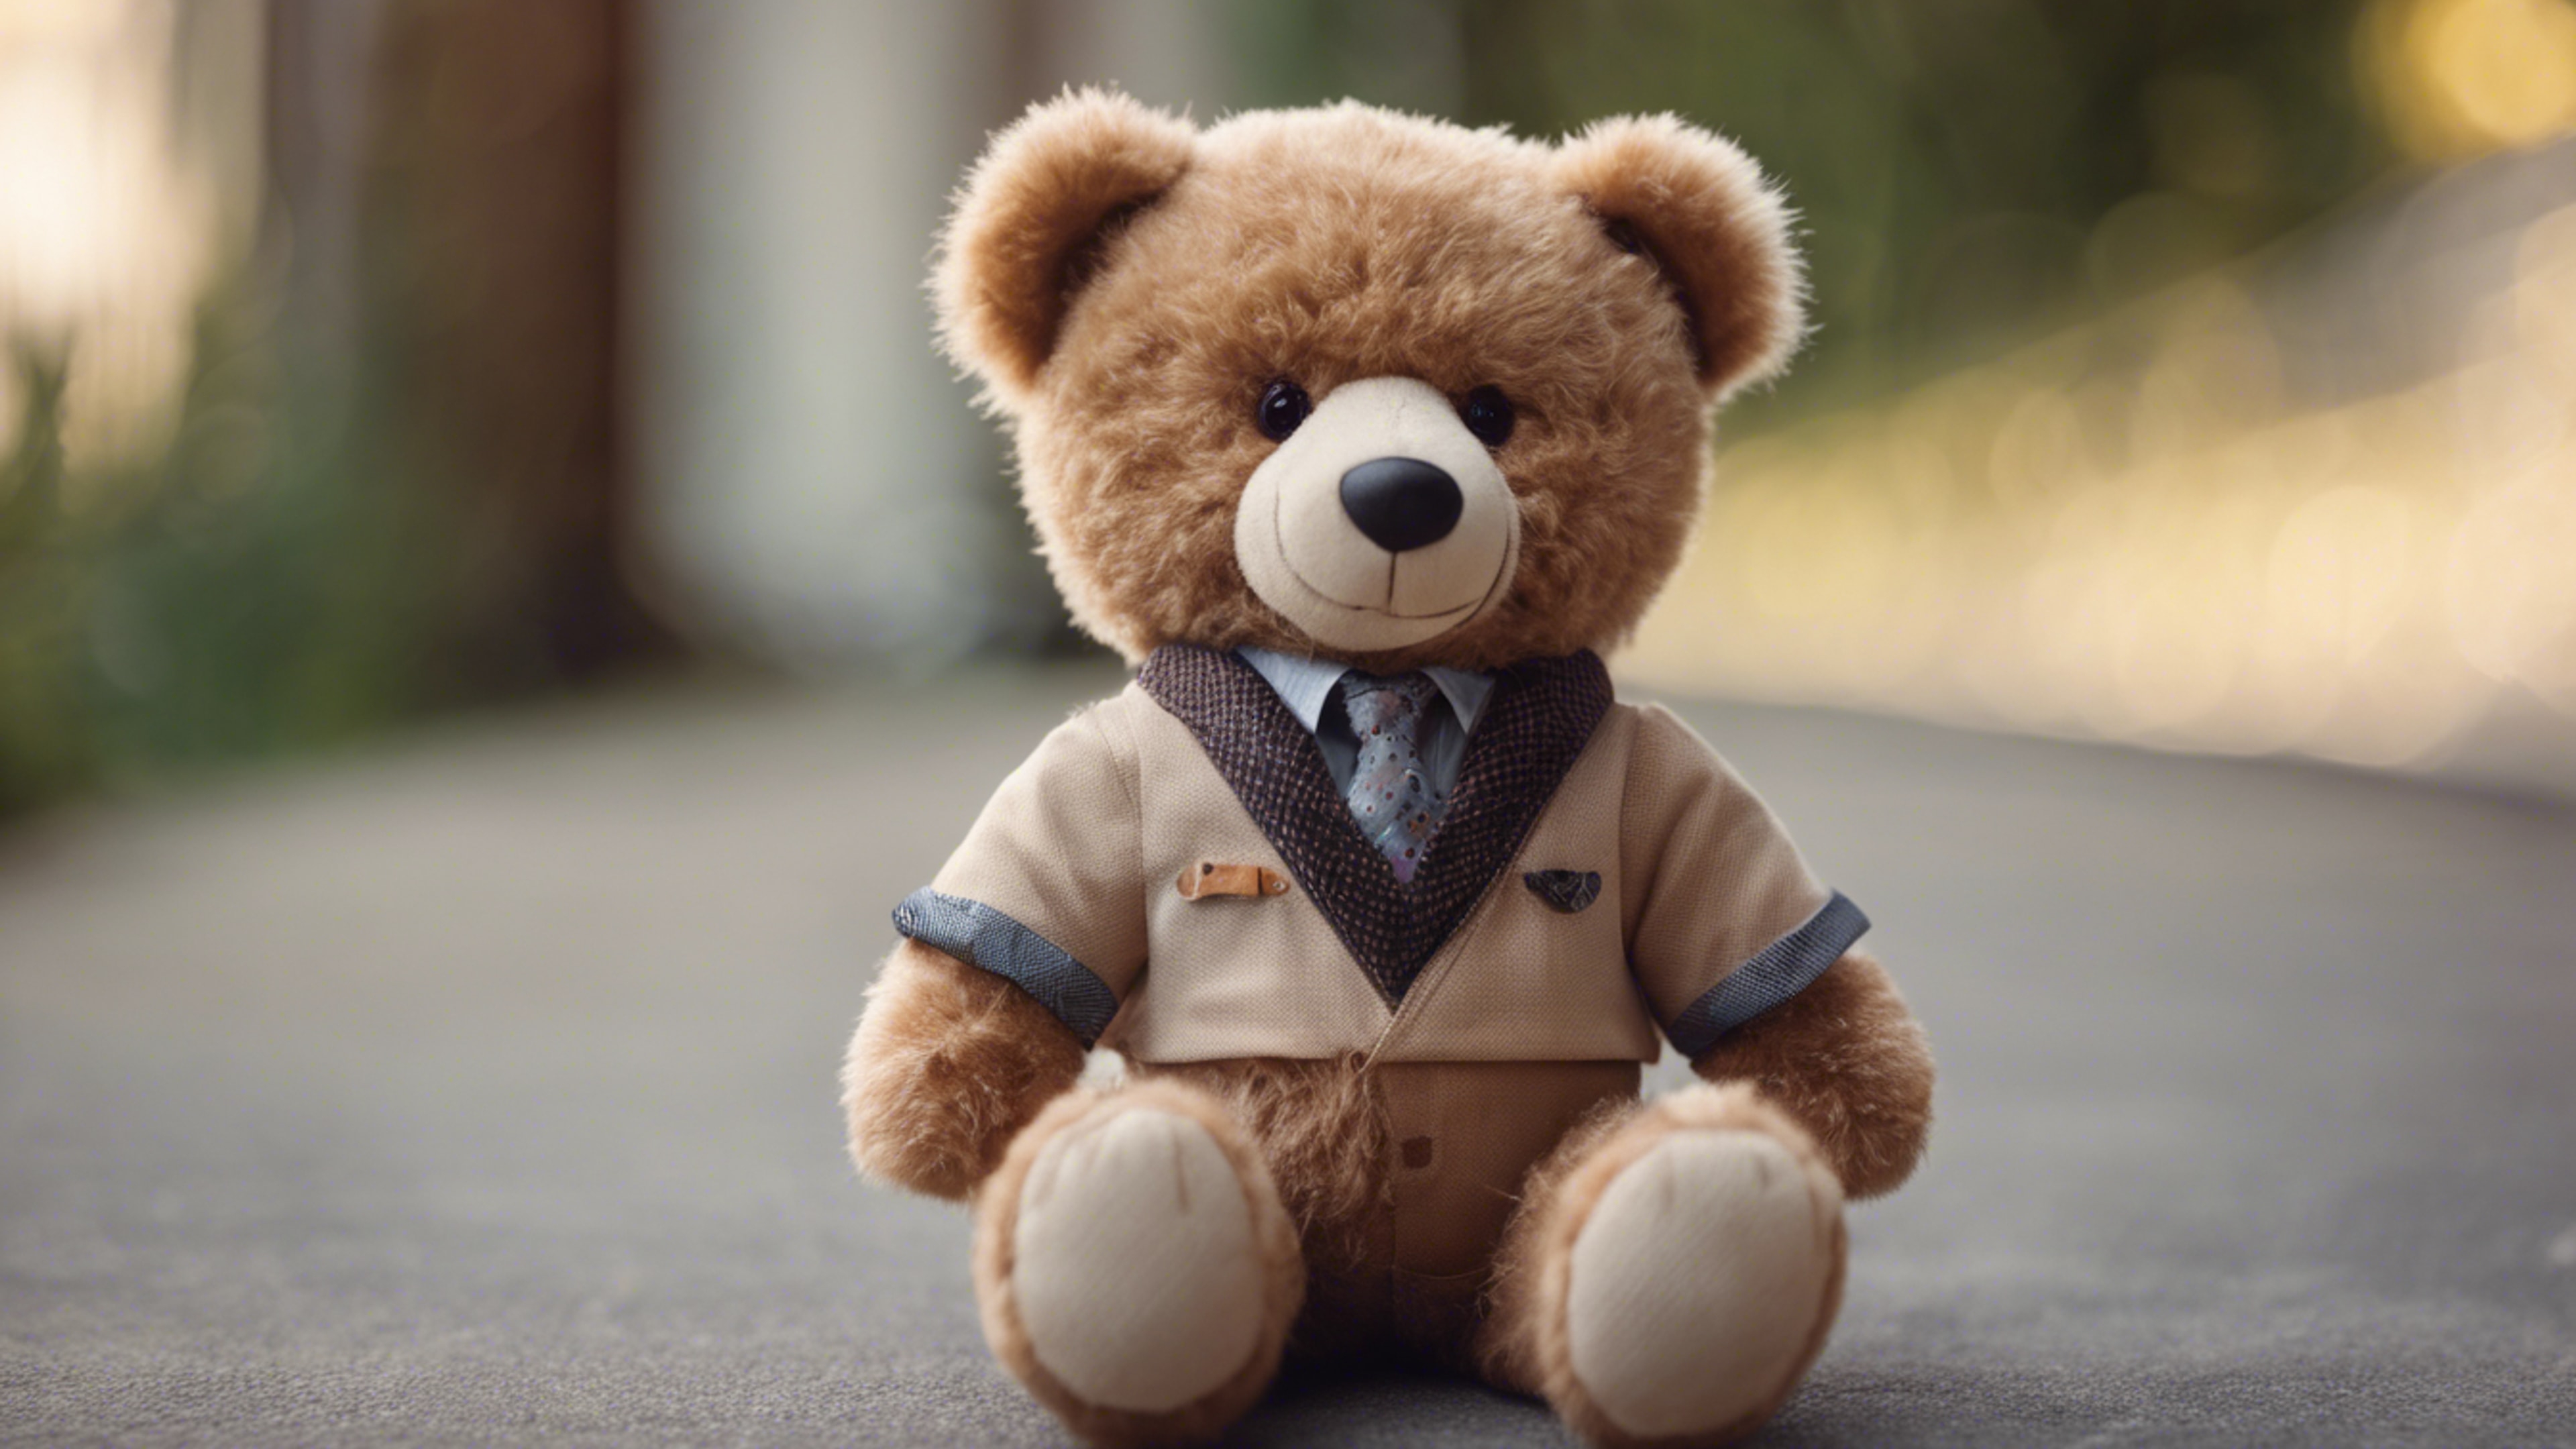 A teddy bear with light brown fur wearing a preppy outfit. Sfondo[c4dfc3c378844a52a1e6]